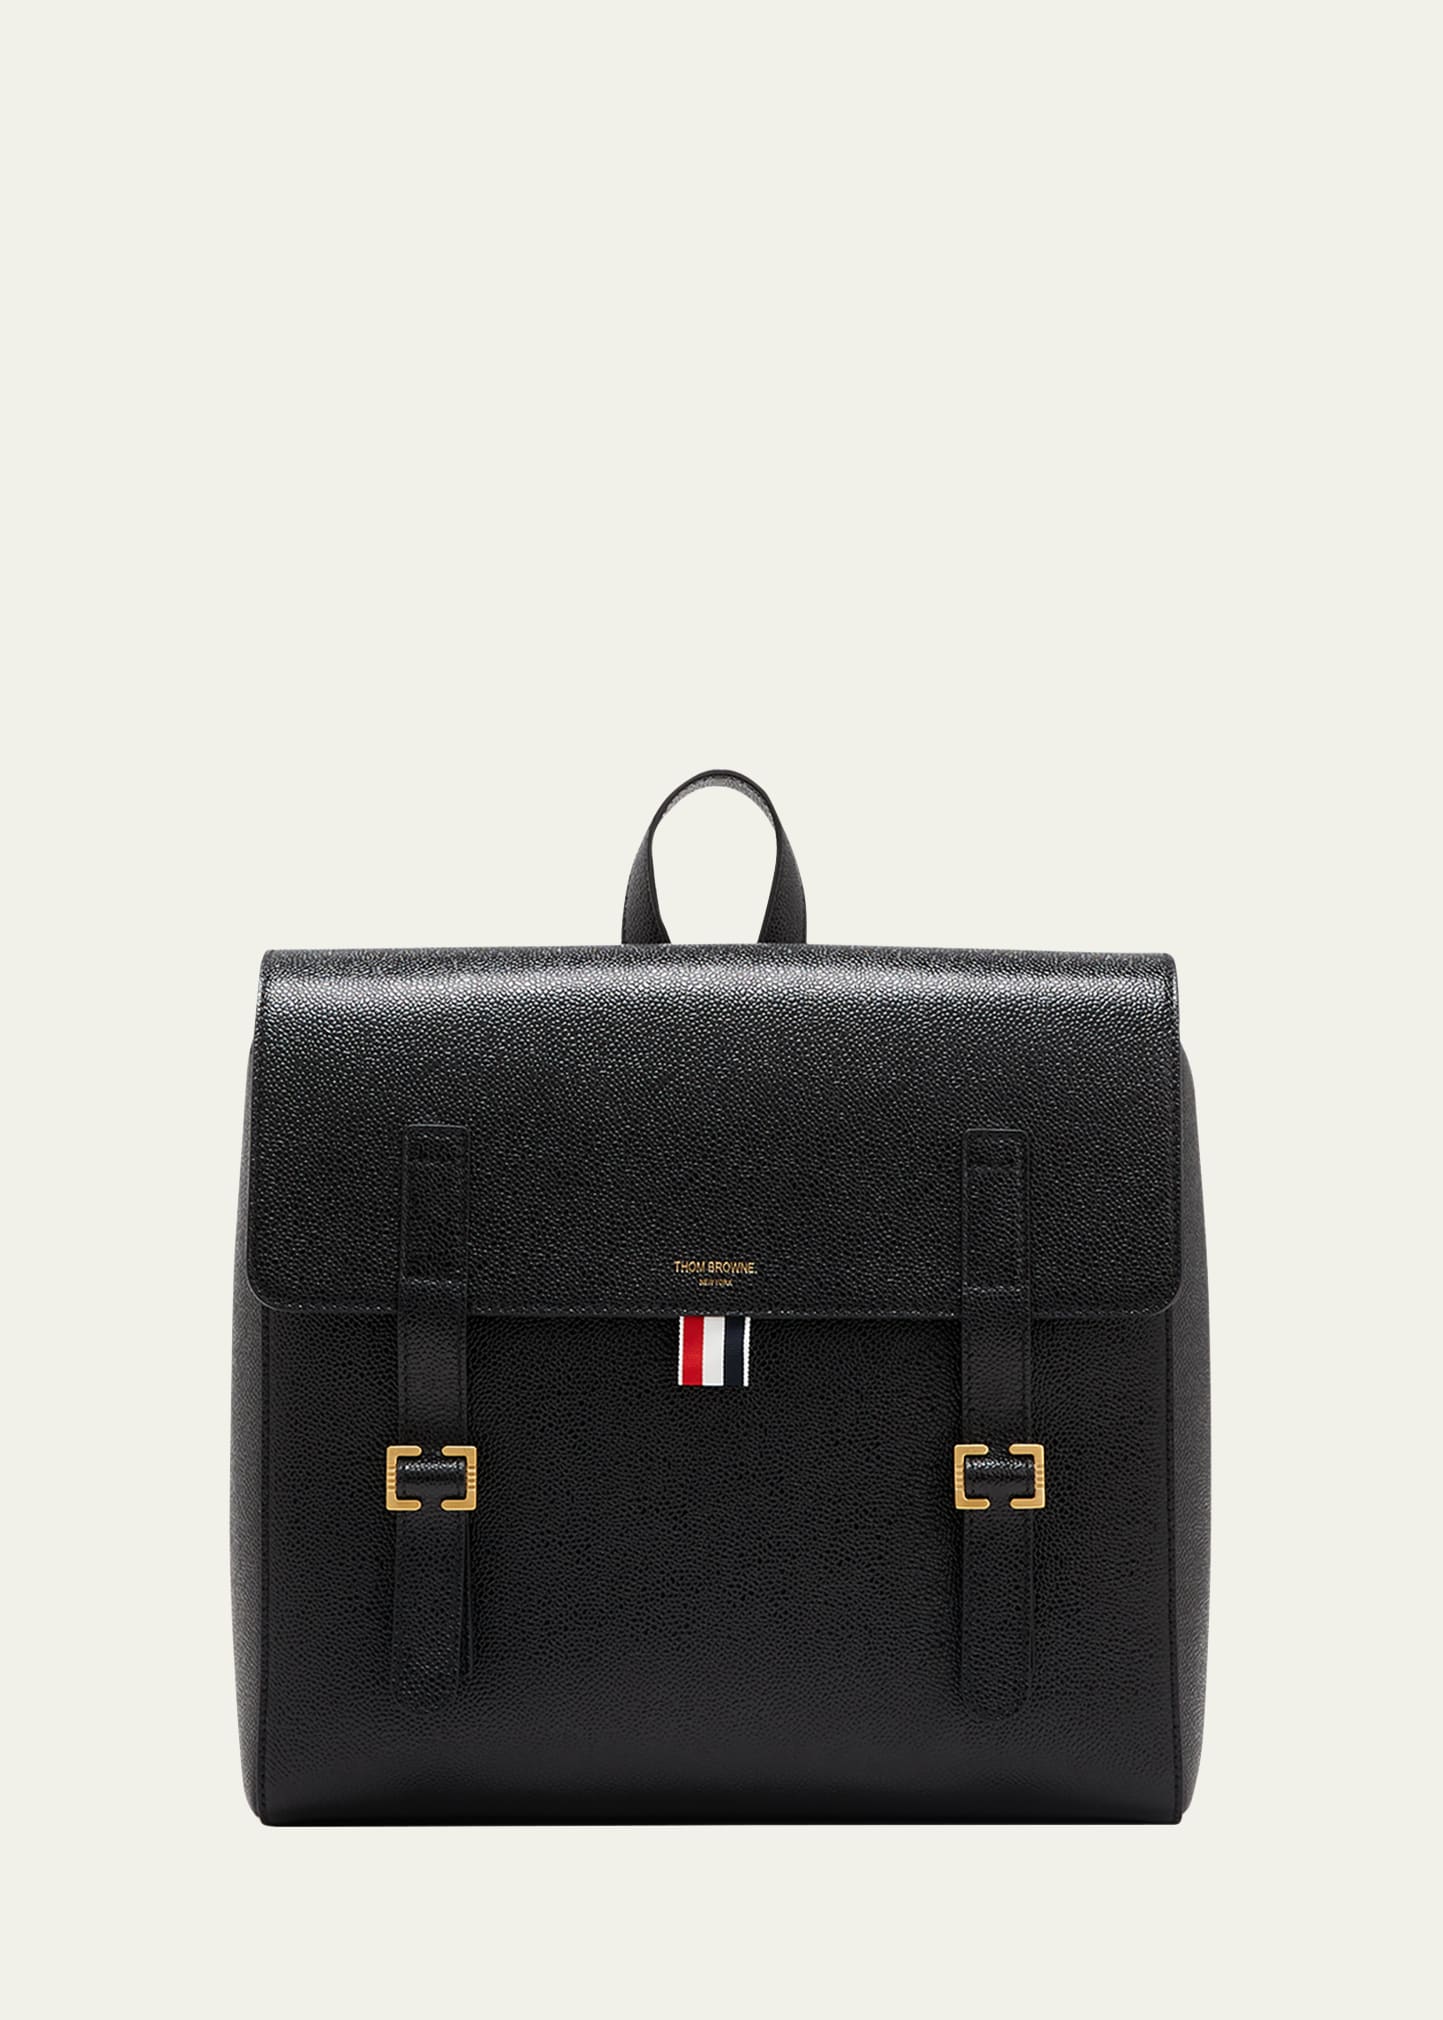 Thom Browne Men's Grained Leather Backpack In Black